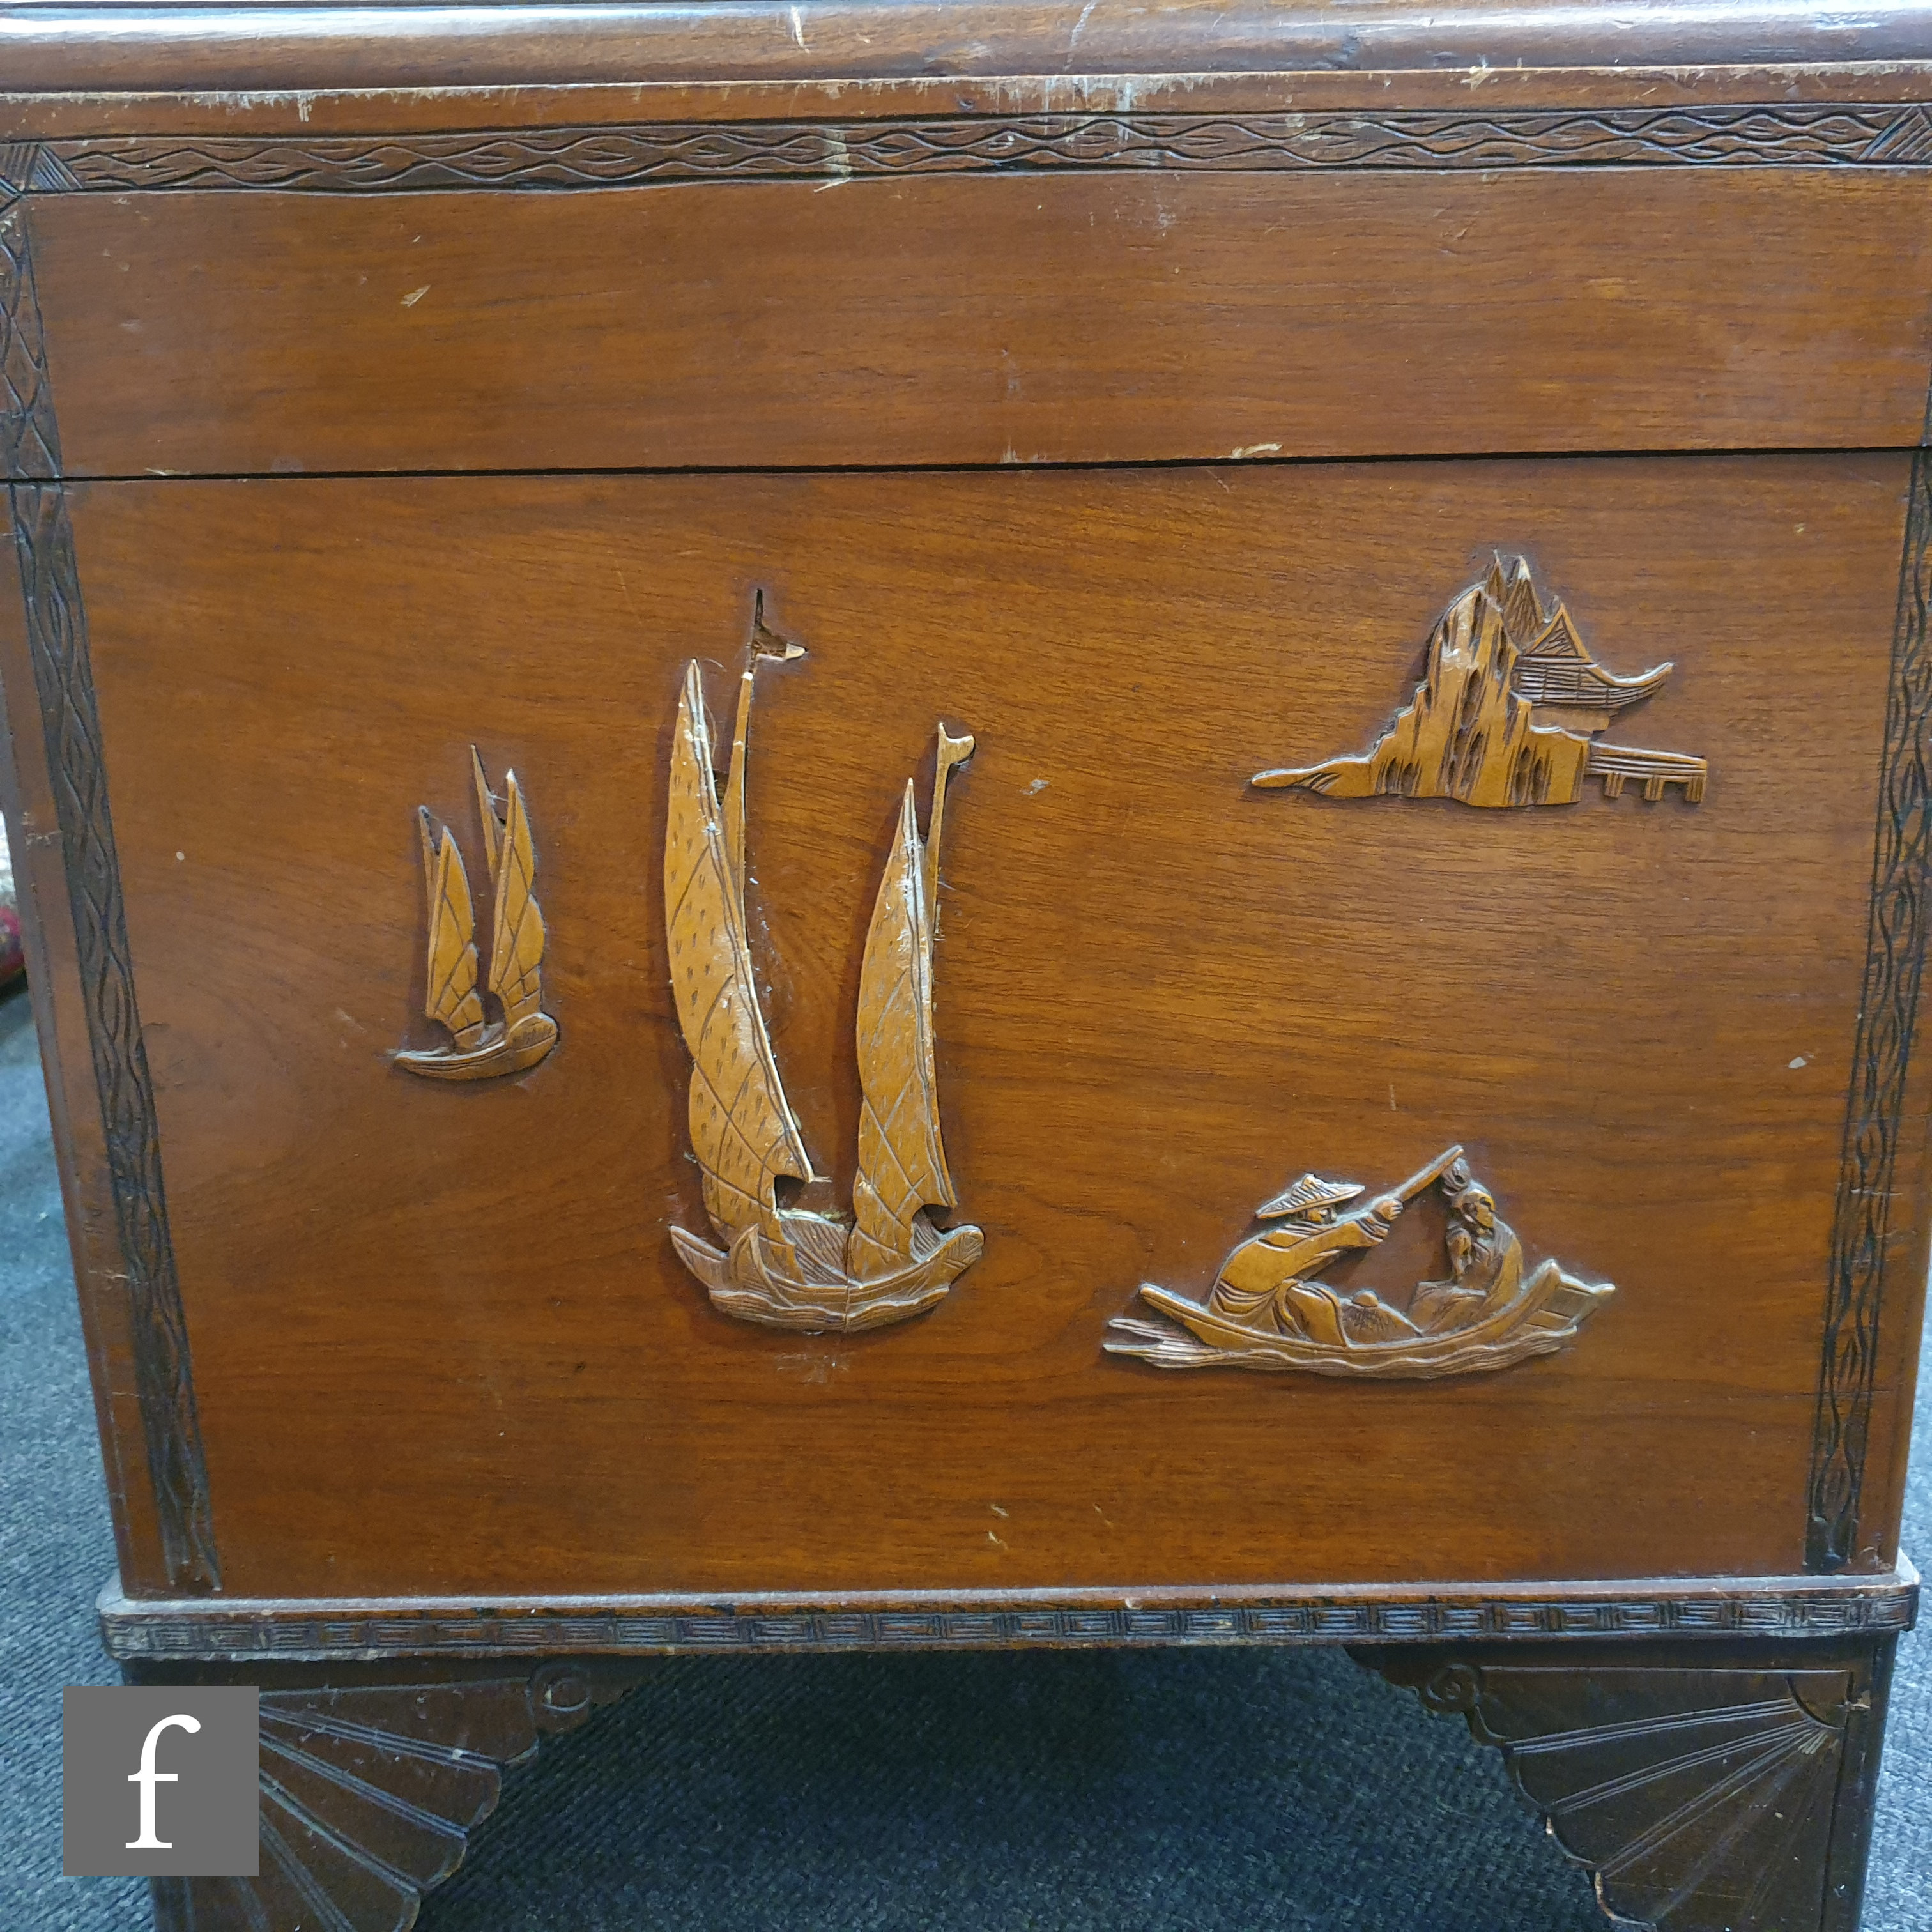 A 20th Century carved camphorwood coffer with raised design detailing goats, figures and landscape - Image 8 of 10